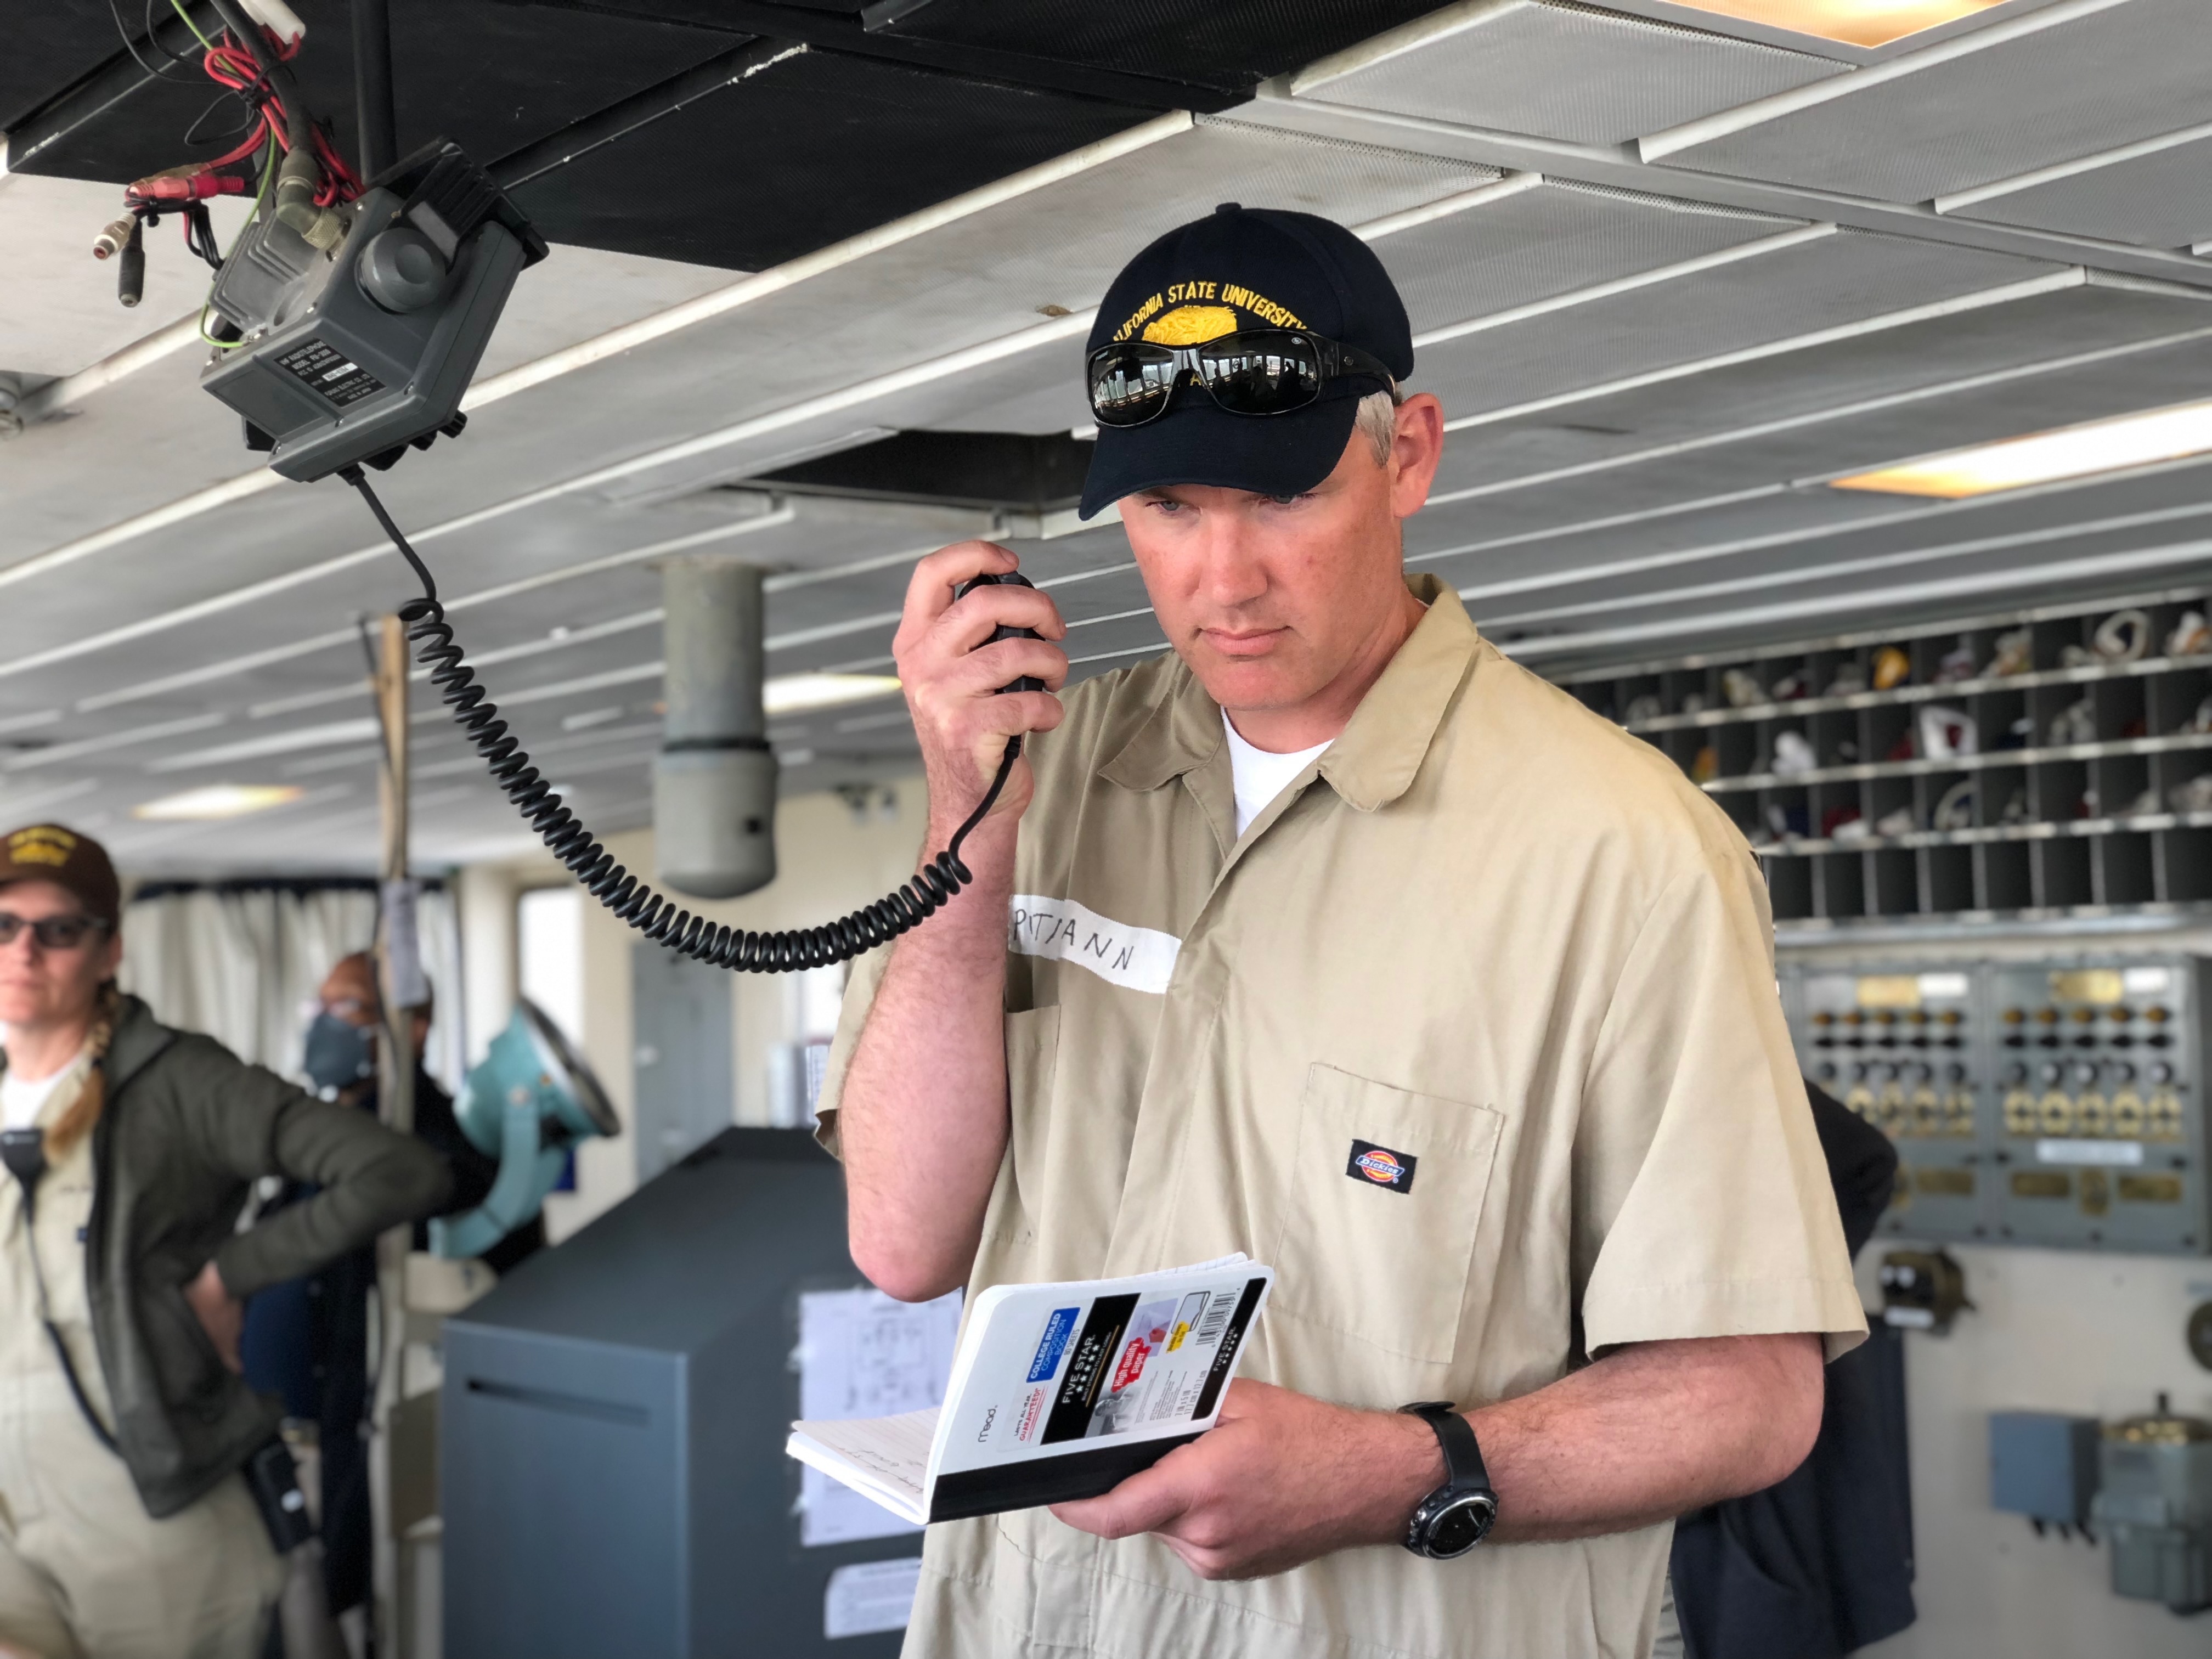 Cadet Bill Puttman on the comms speaking with Vessel Traffic Contol (VTC)